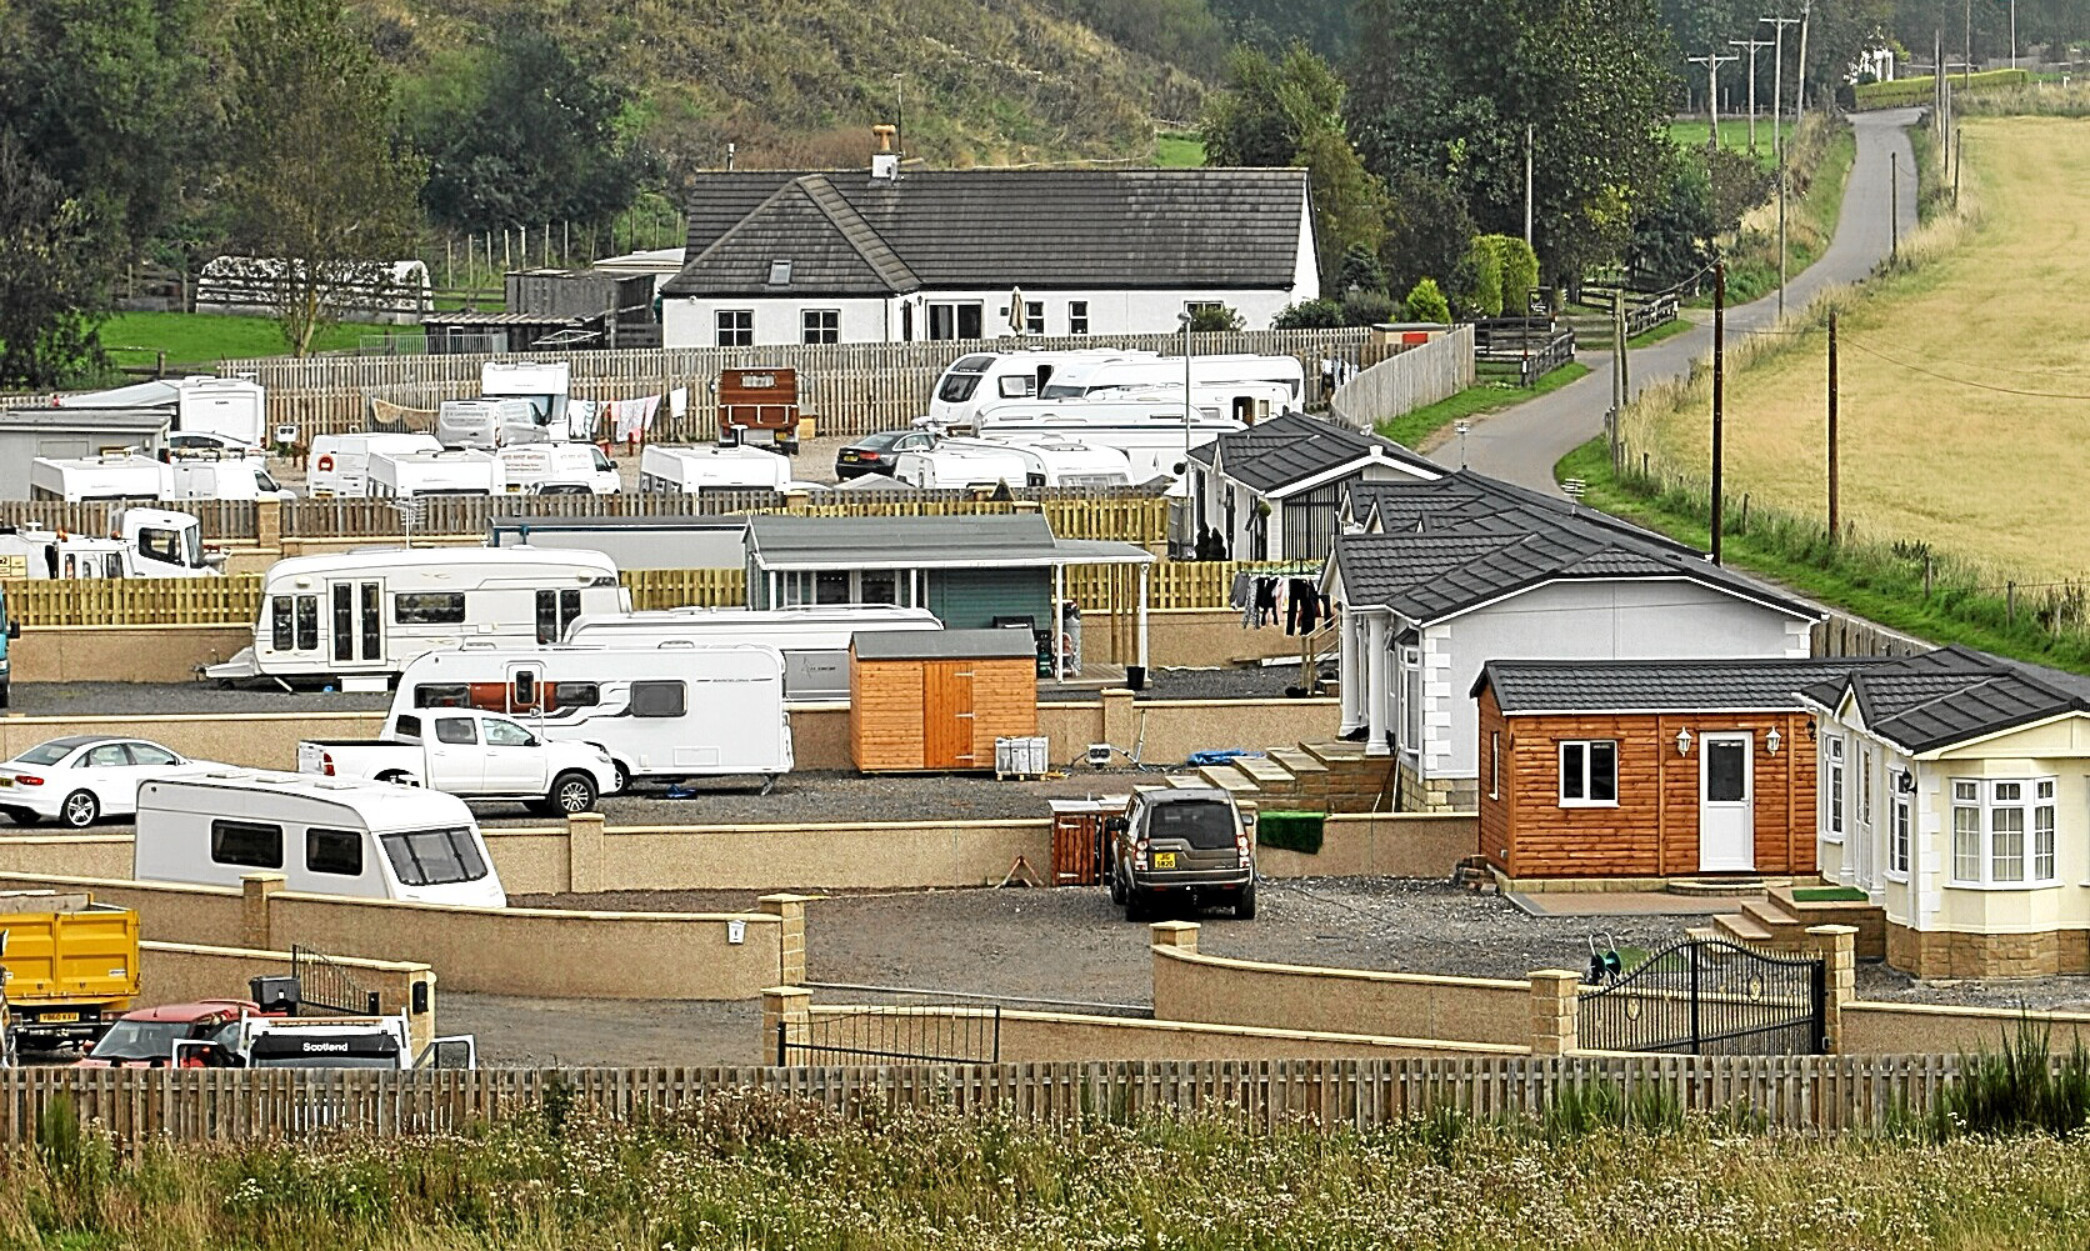 The Travellers' site at St Cyrus.